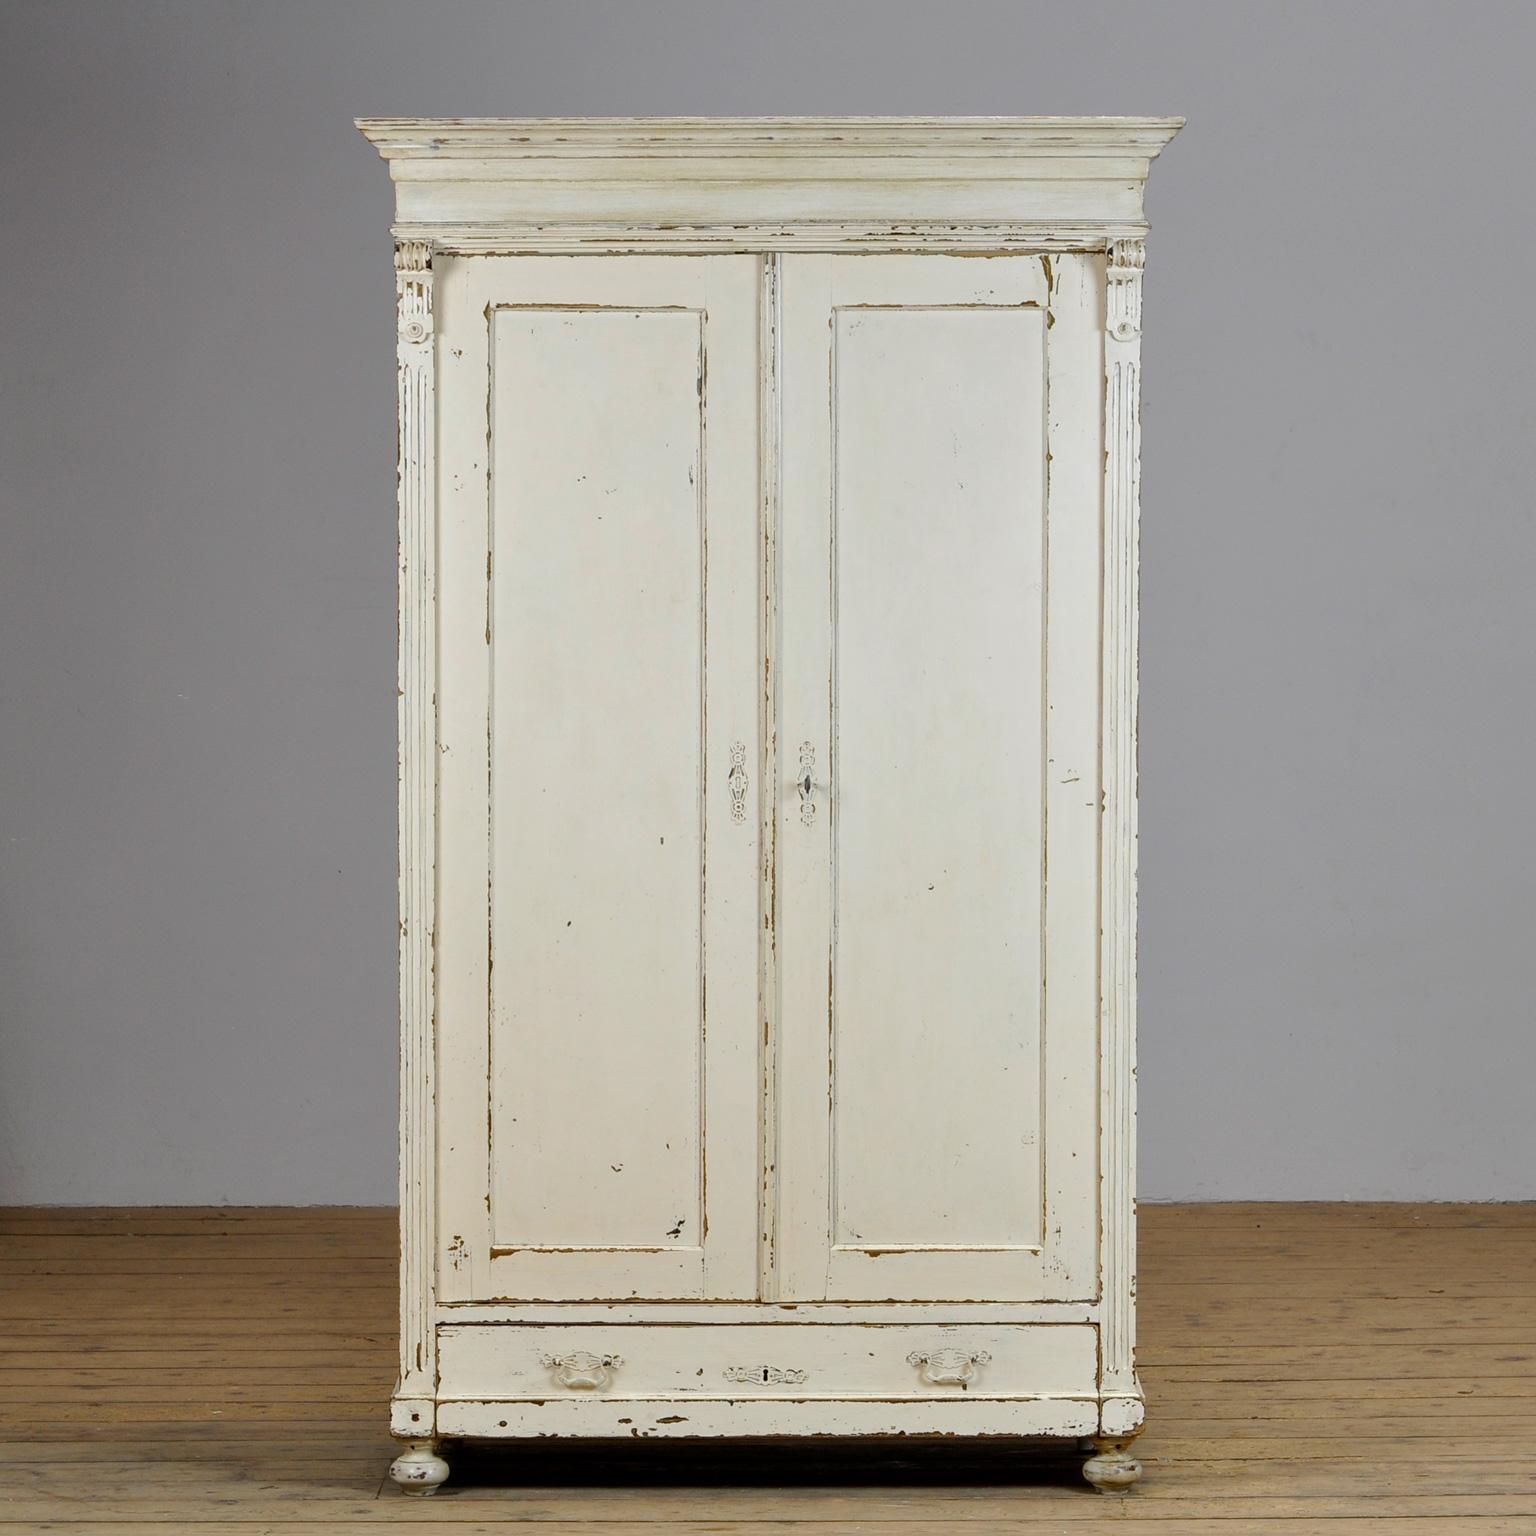 This brocante cabinet comes from hungary, circa 1920. The cabinet is made of pine wood and has its original paint. The cabinet has three shelves. At the bottom a drawer. With well-functioning lock/key.